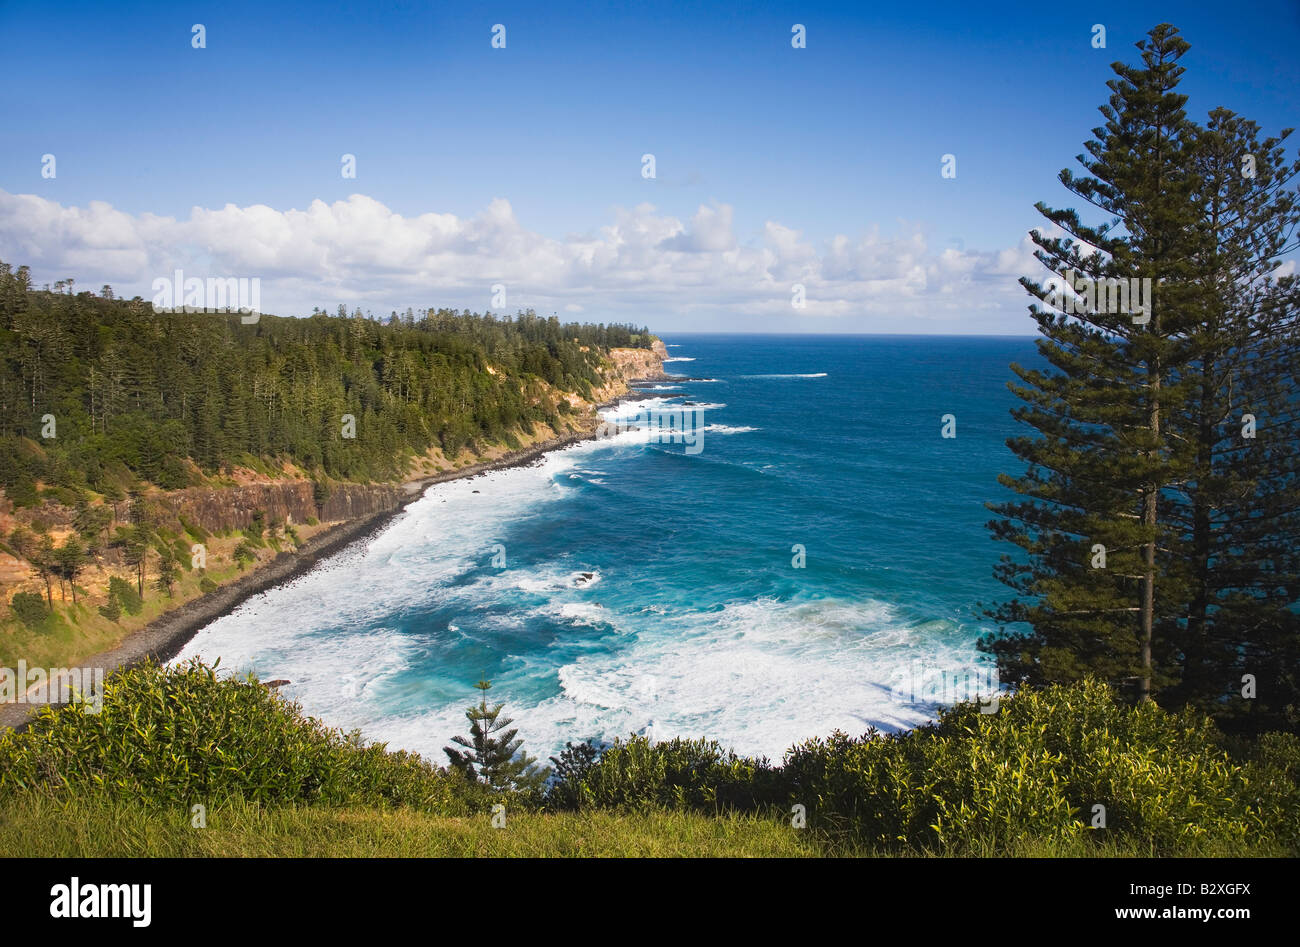 A view of Anson Bay with Norfolk Pine trees reaching out into the Pacific Ocean along a rugged cliff edge, Norfolk Island South Pacific, Australia Stock Photo